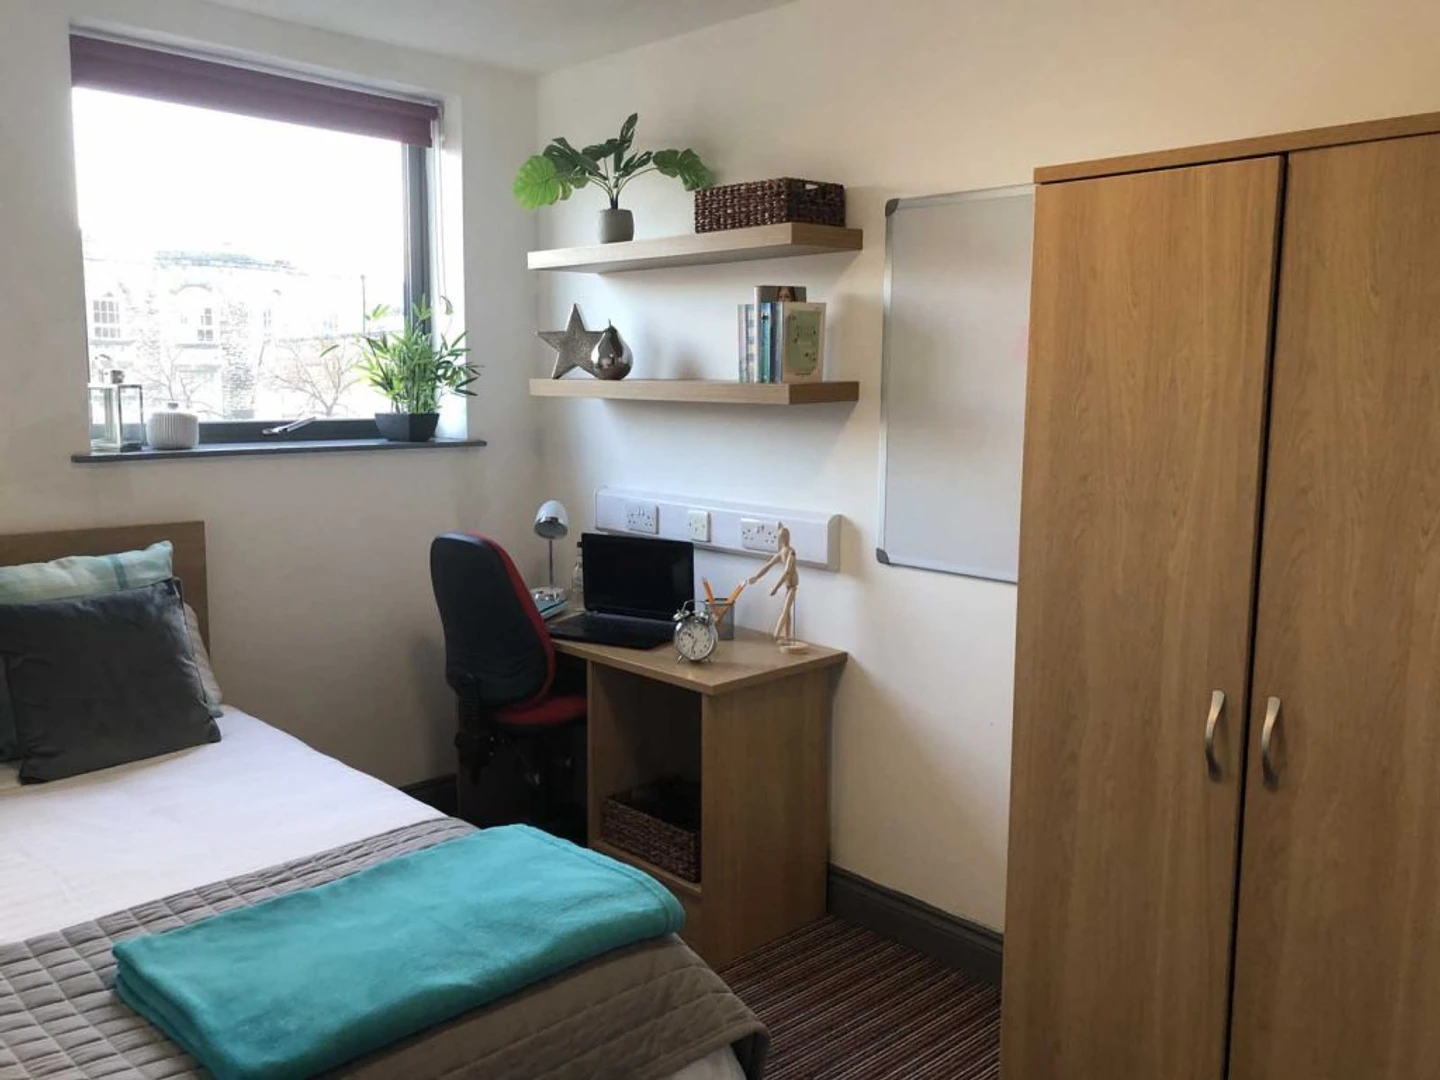 Cheap private room in sunderland